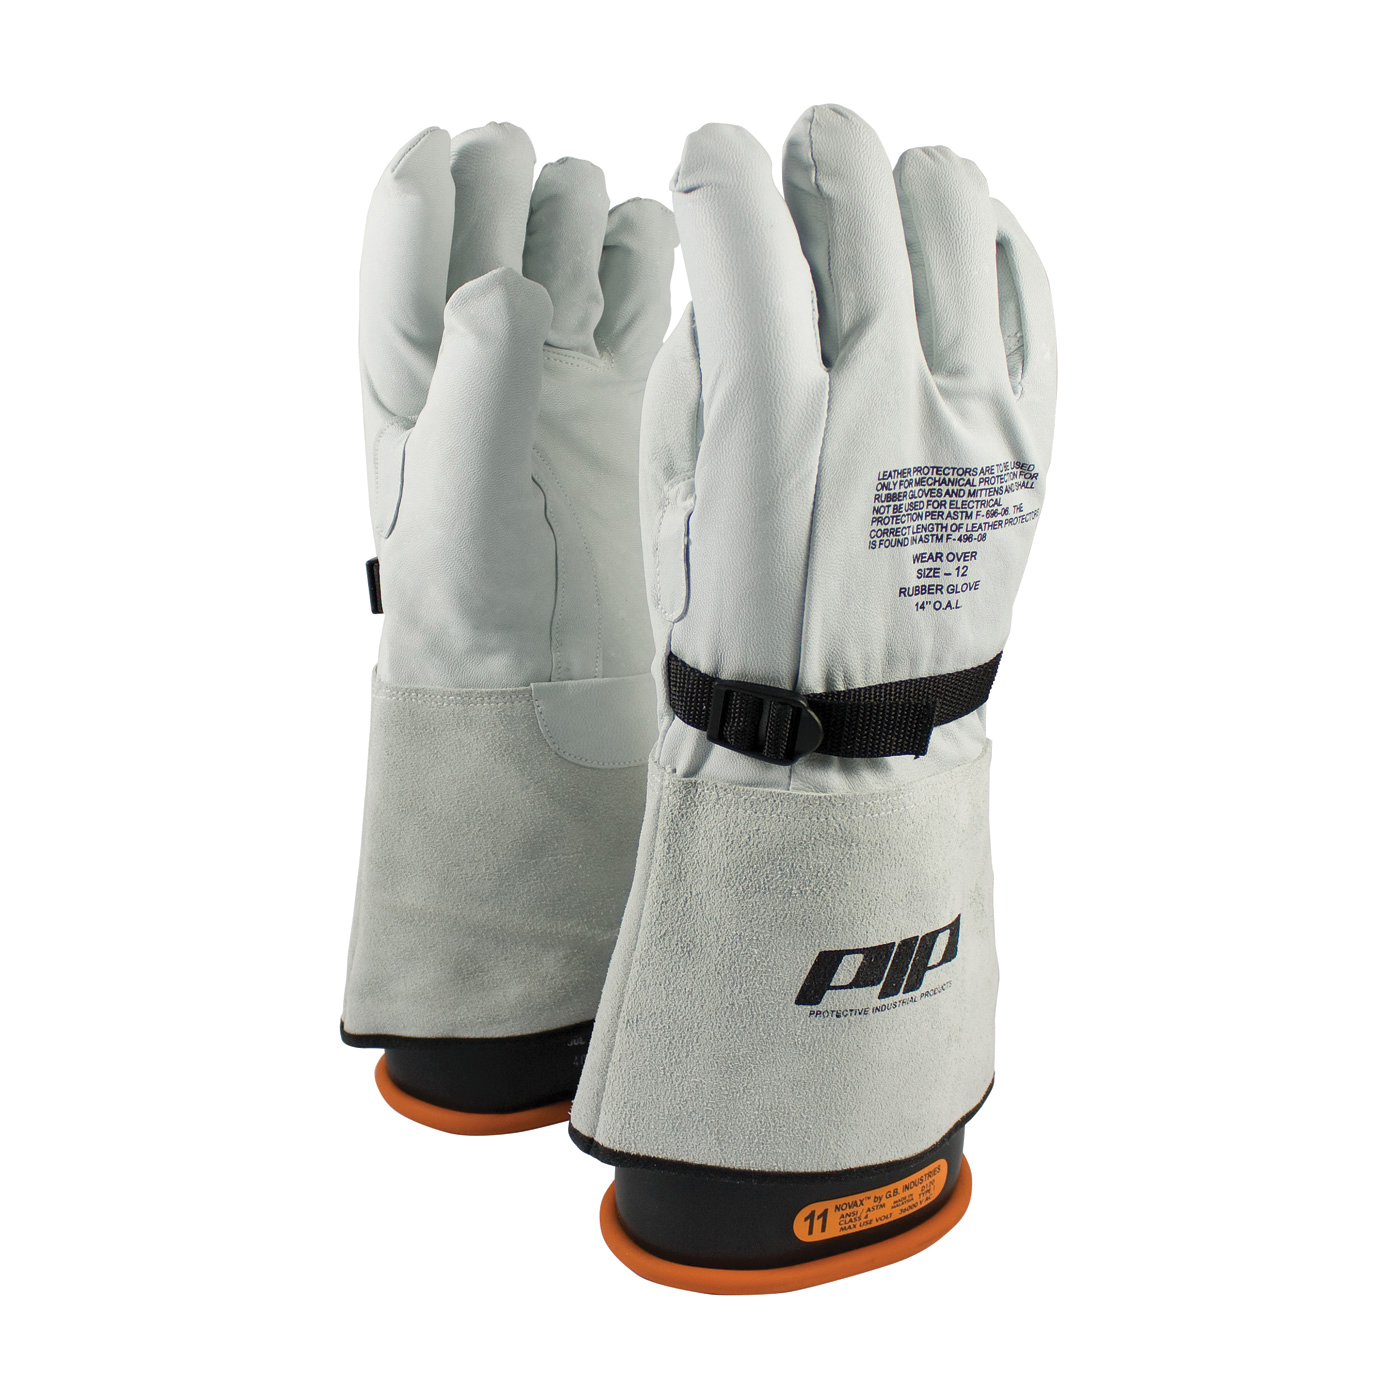 PIP® 148-6000 148-6000 General Purpose Gloves, Leather Palm, Full Finger/Straight Thumb Style, Top Grain Goatskin Leather Palm, Top Grain Goatskin Leather, Natural, Gauntlet Cuff, Uncoated Coating, Resists: Abrasion, Unlined Lining